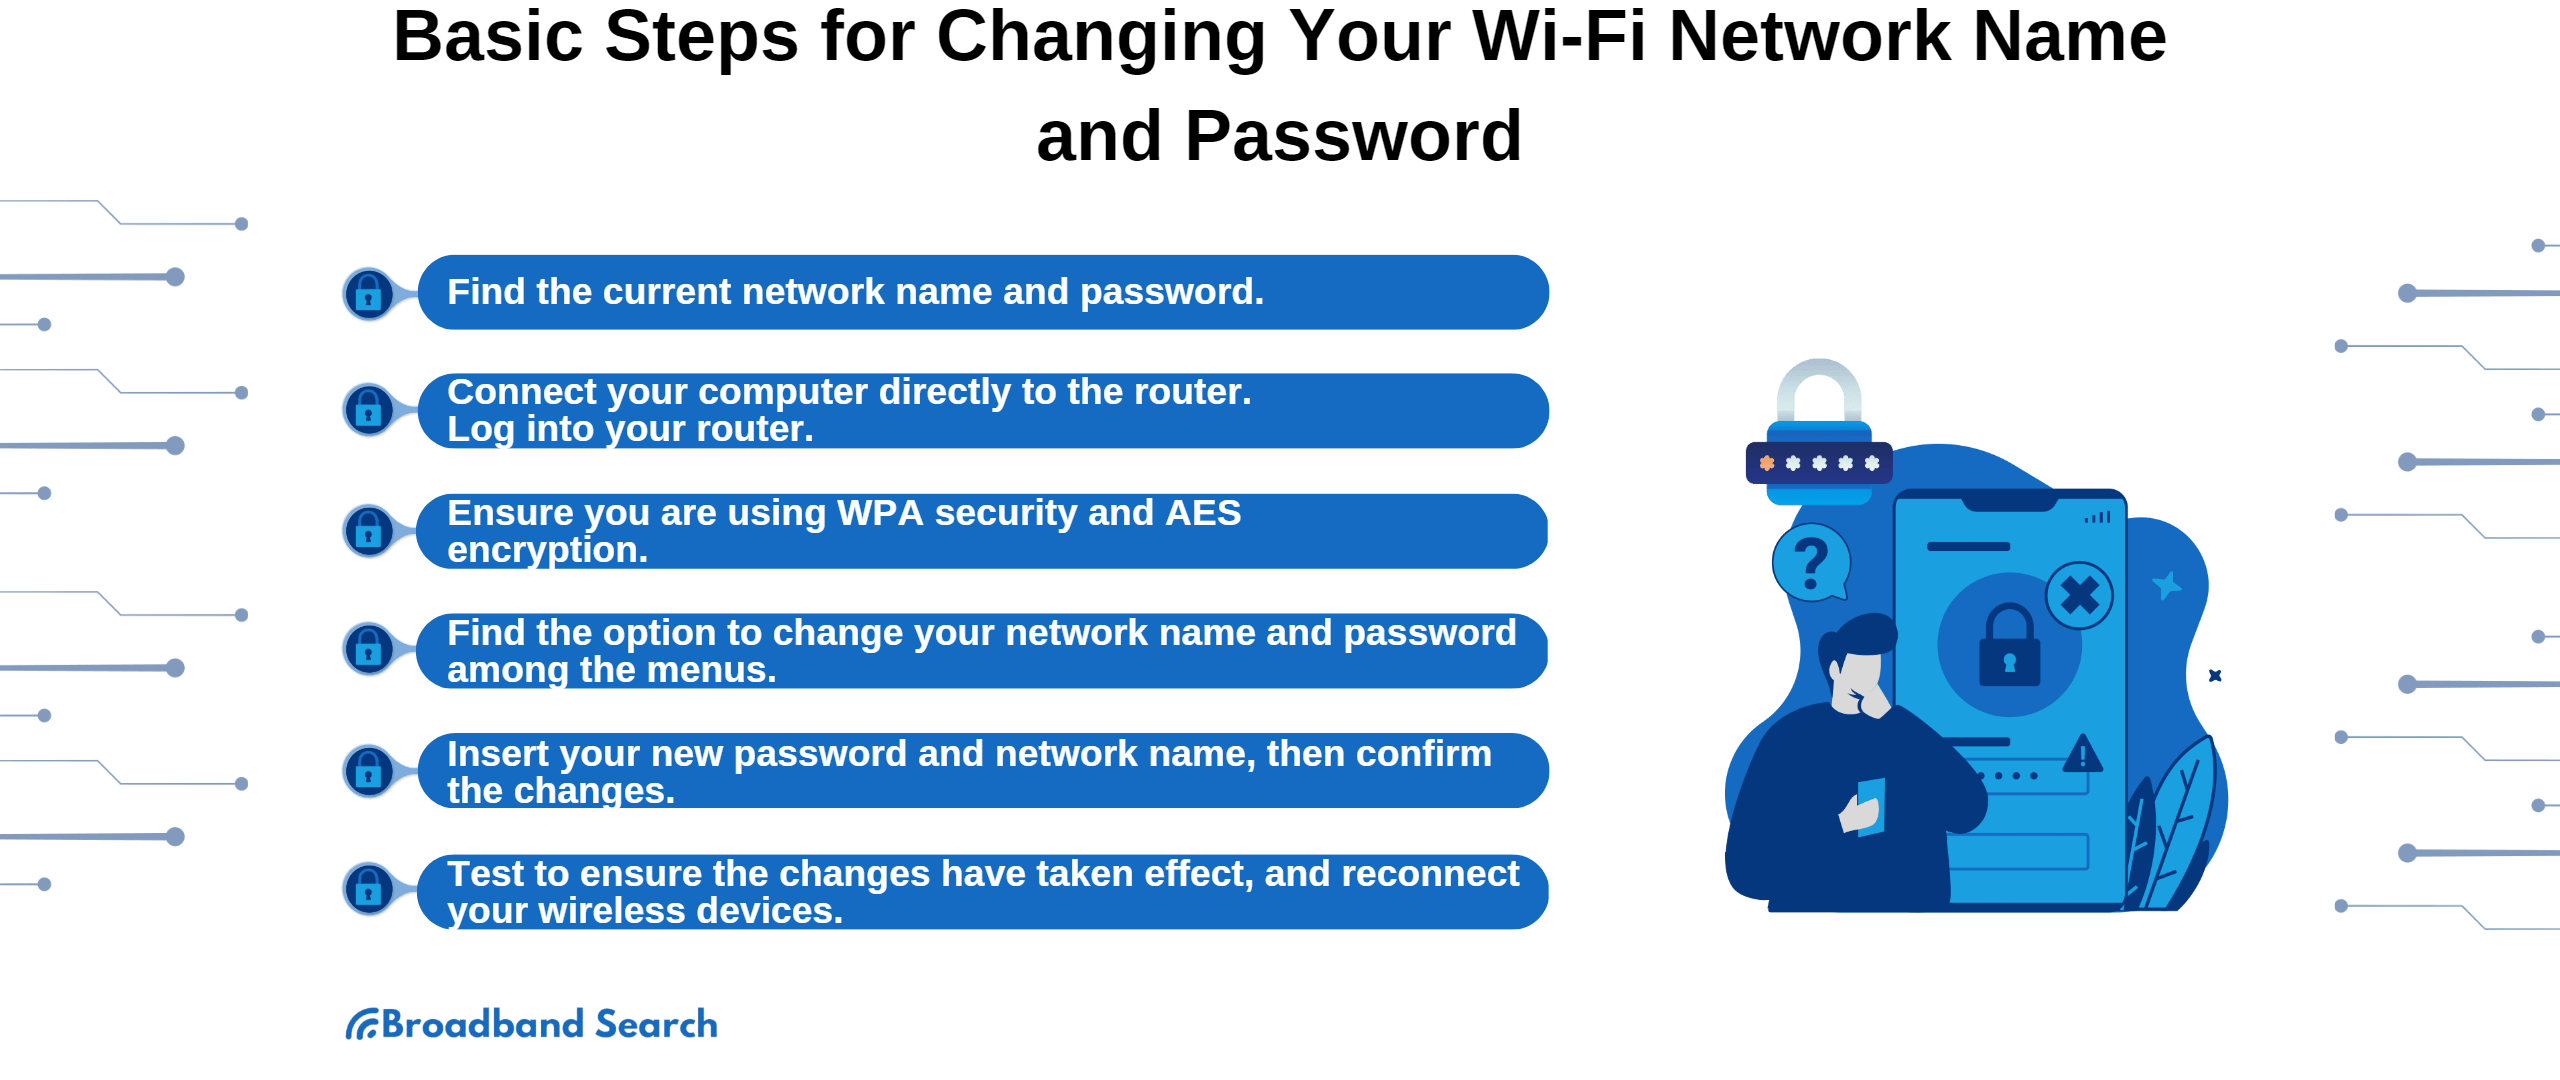 Basic steps for changing WiFi network name and password